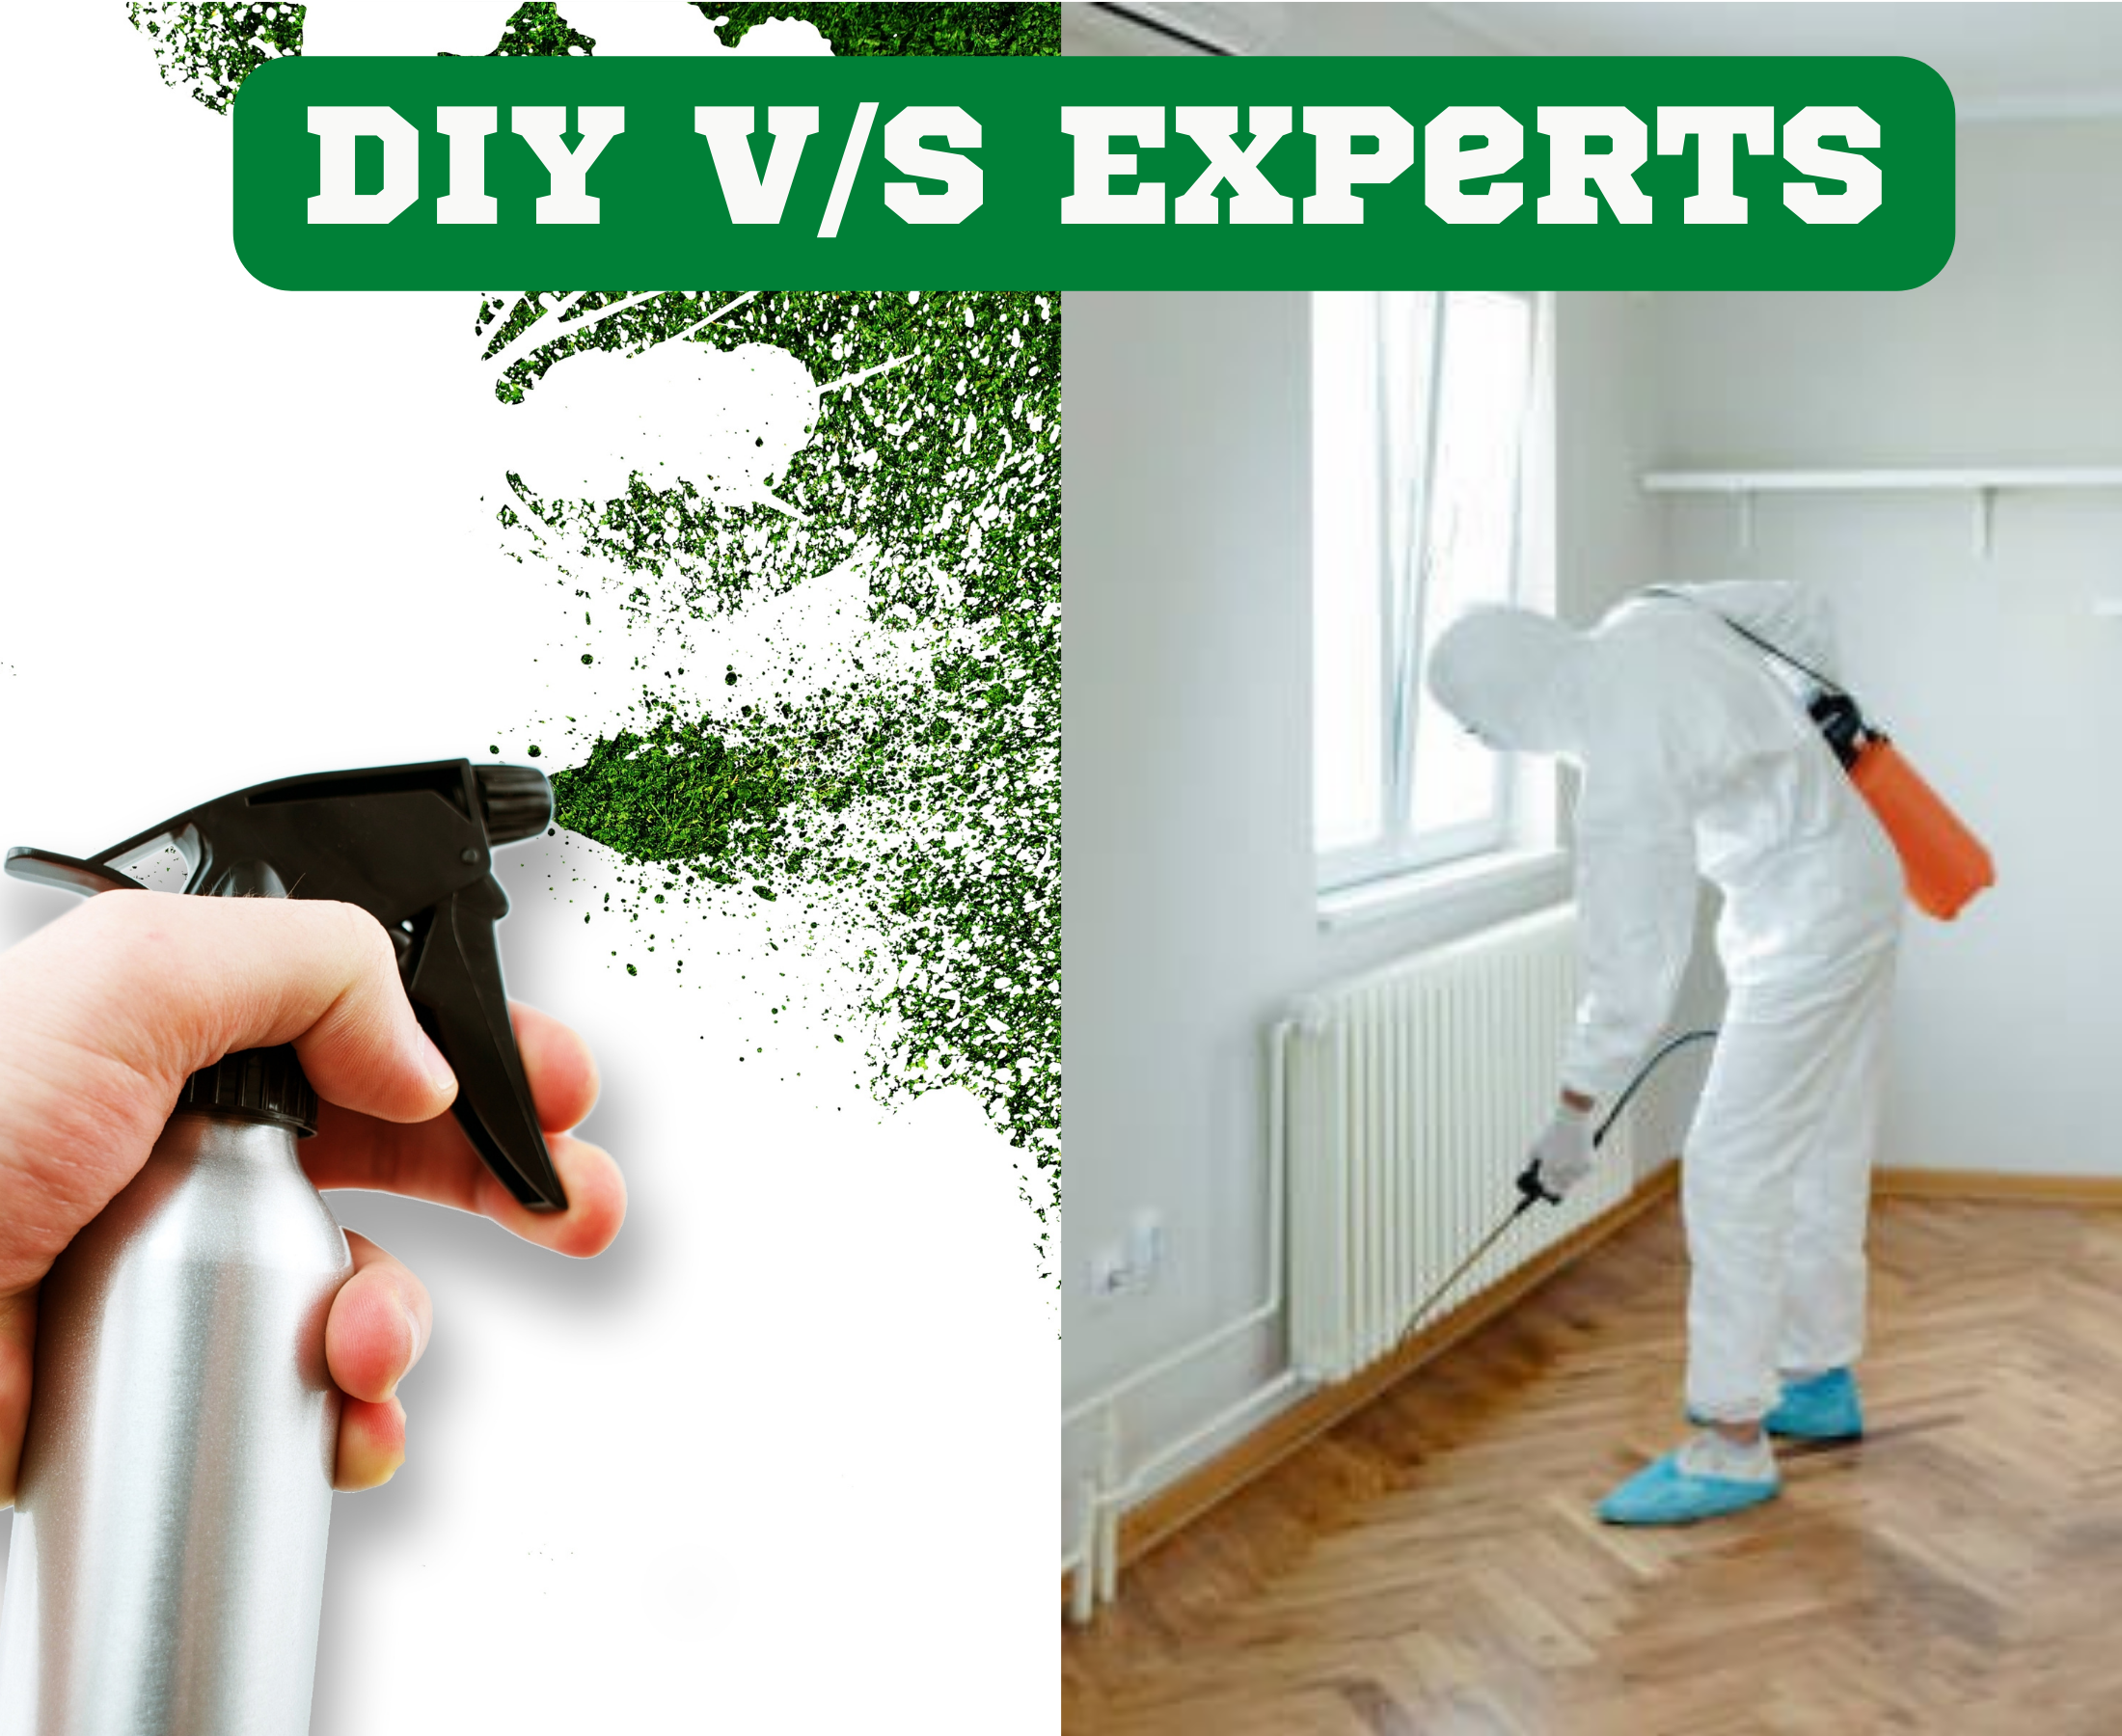 Do it yourself pest control v/s pest control by experts